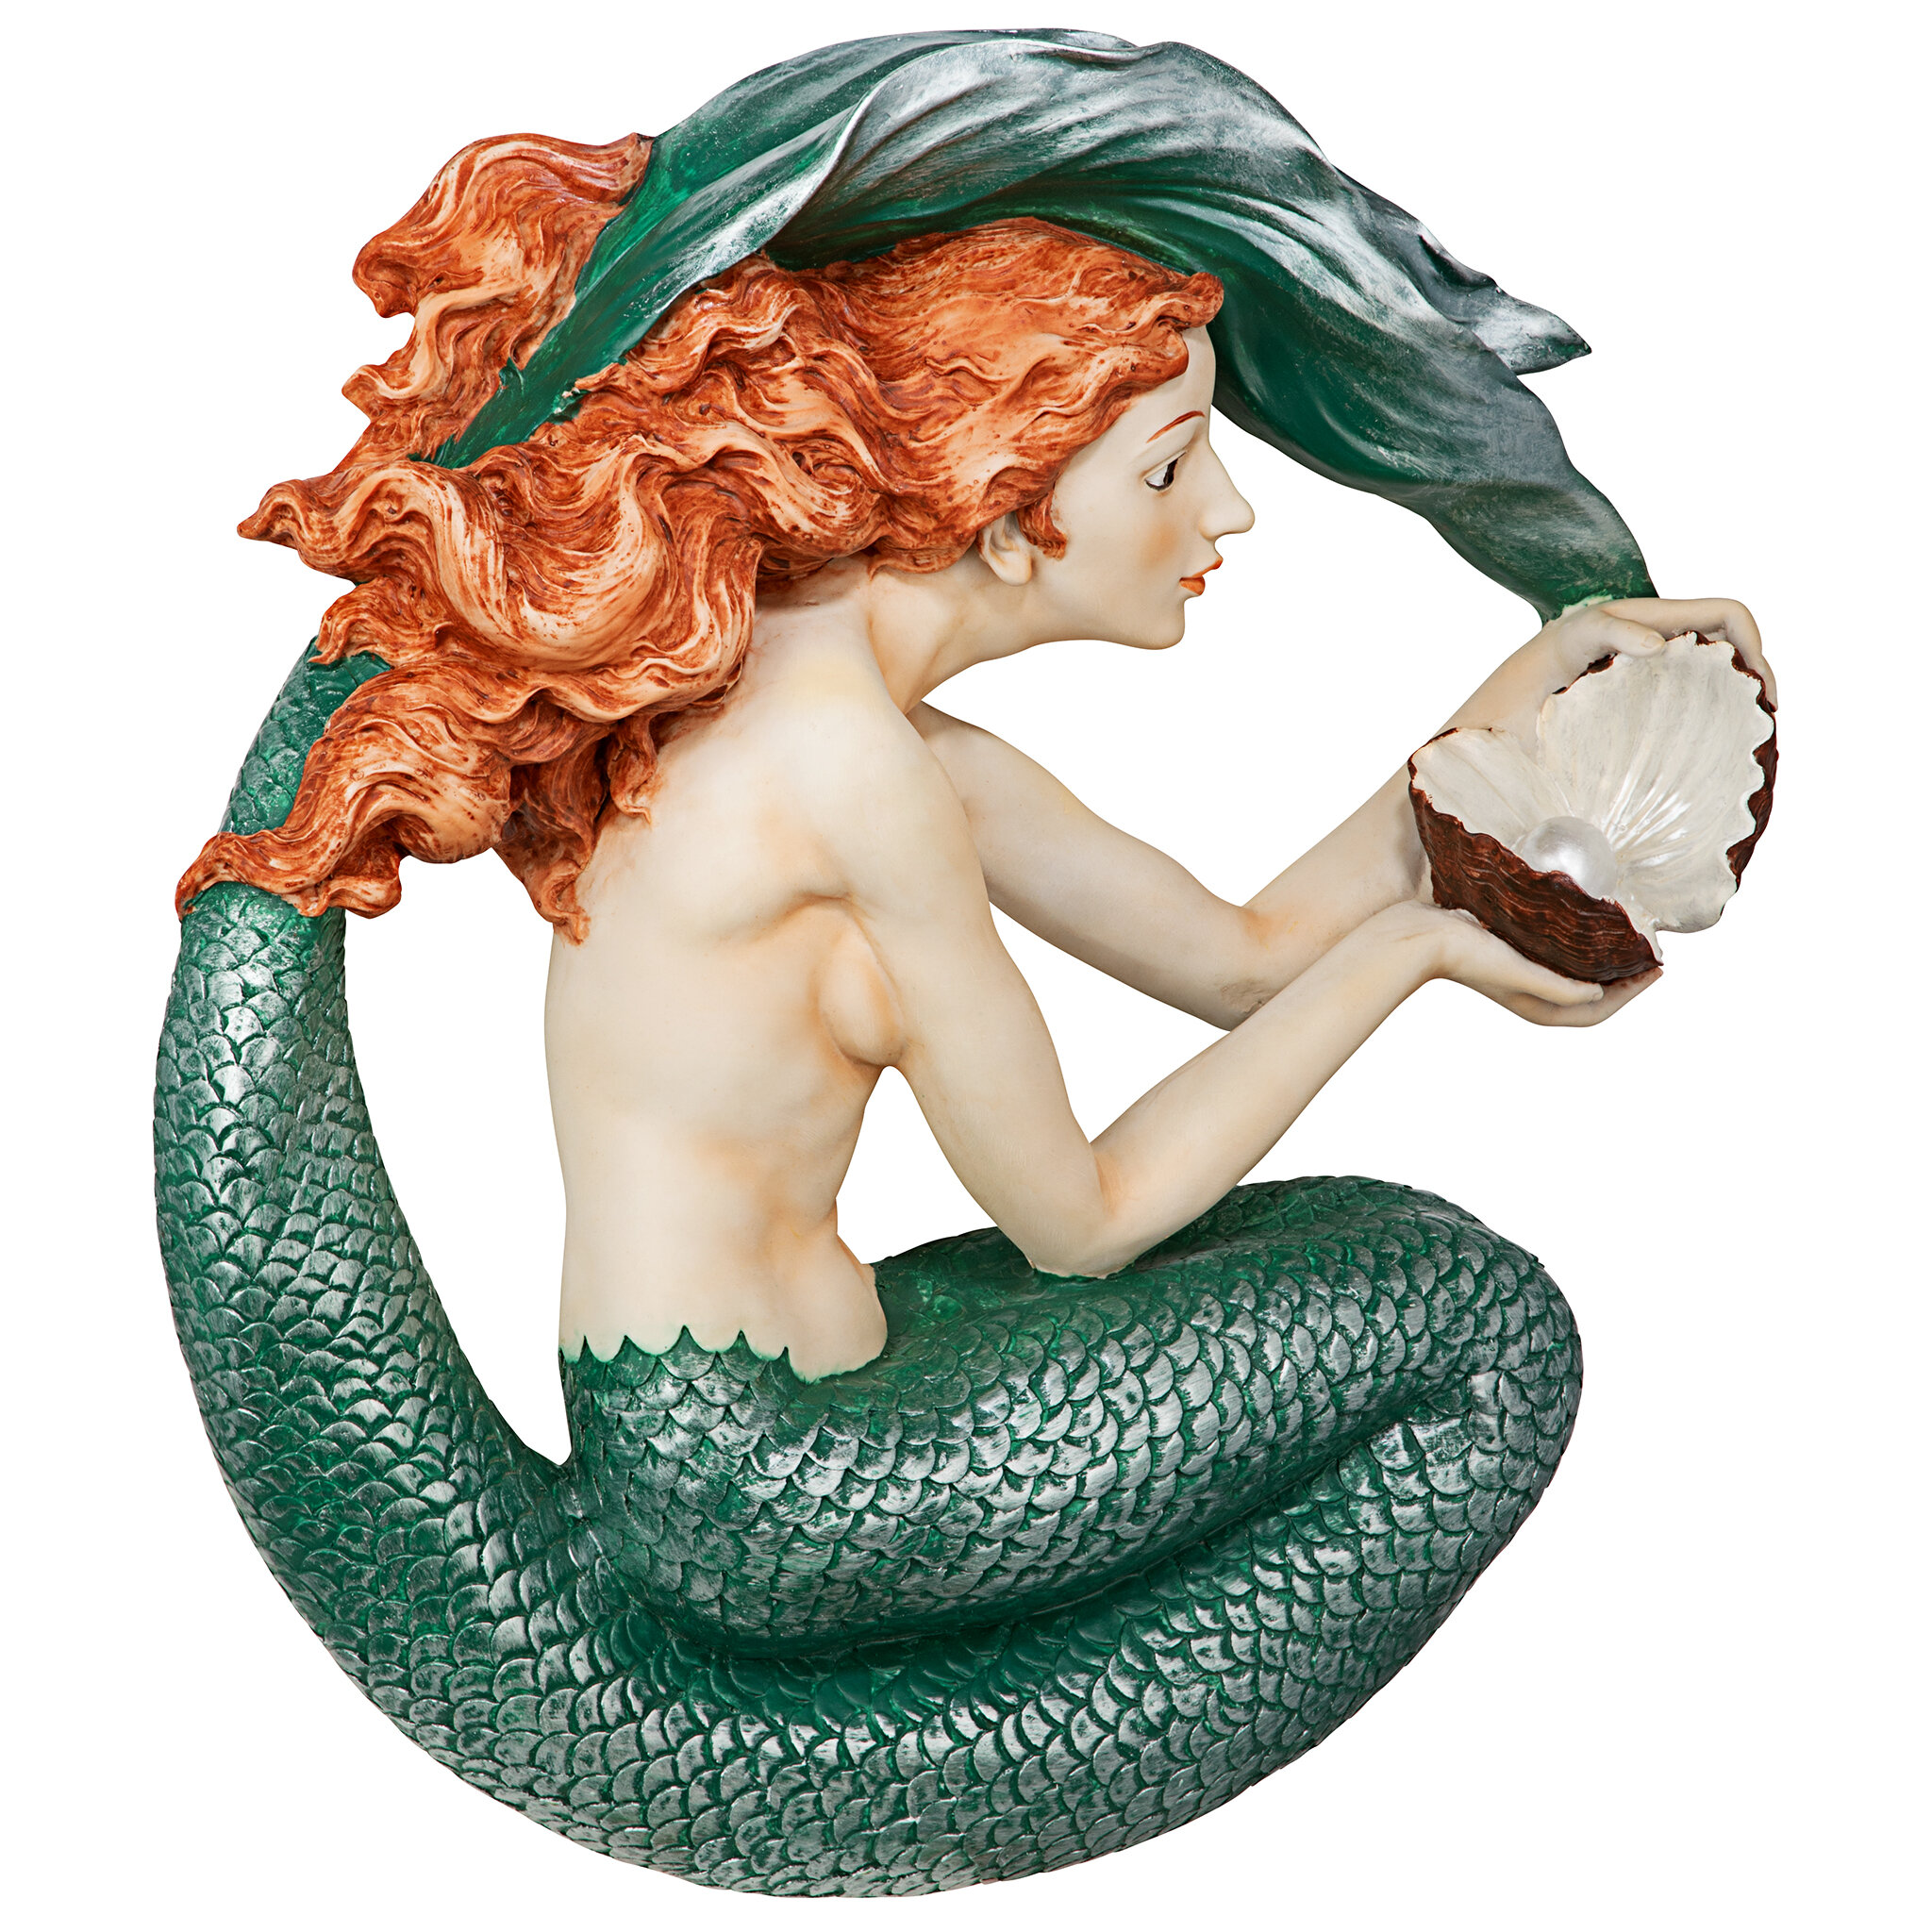 The Seashell Maiden Mermaid Design Toscano Exclusive Hand Painted Wall Sculpture 